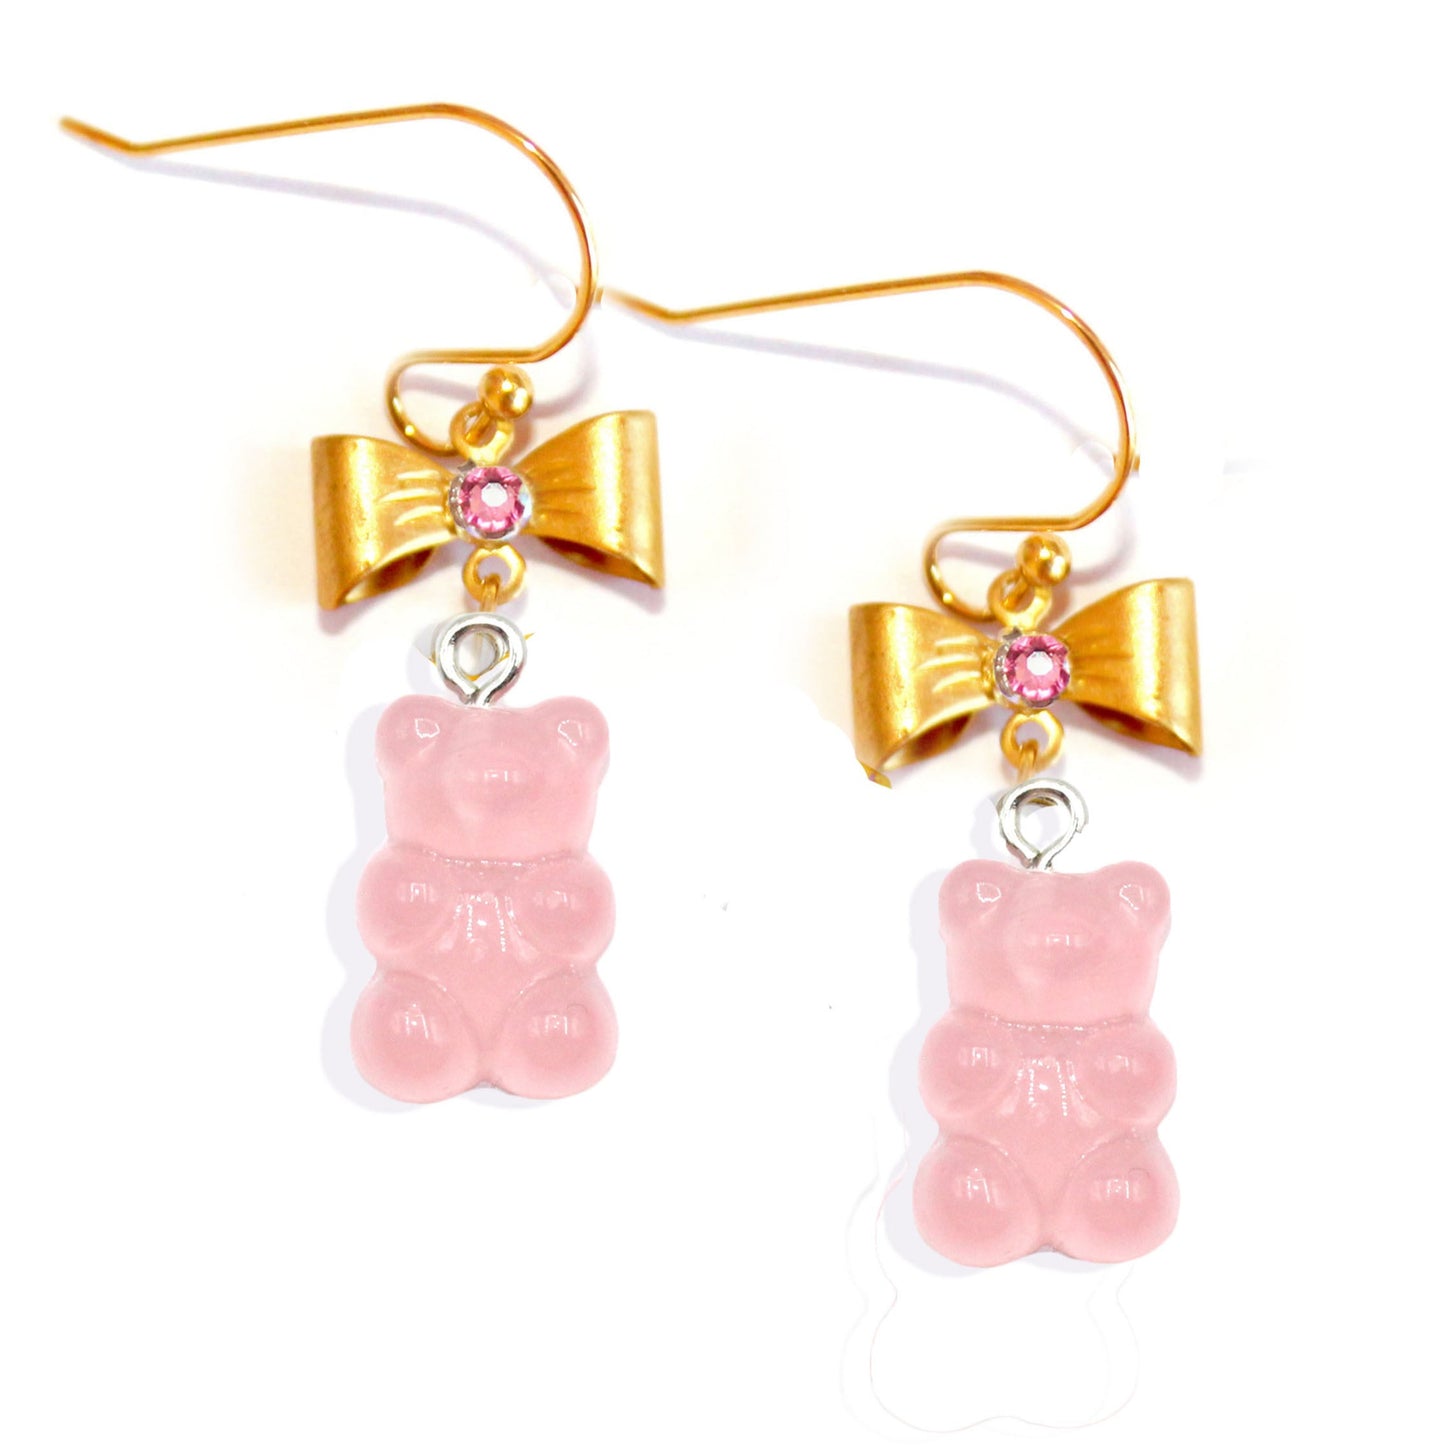 Gummy Bear Candy Earrings Pastel or Hot Pink with Bows and Pearls Resin Stainless Steel Kawaii handmade drop statement earrings for women